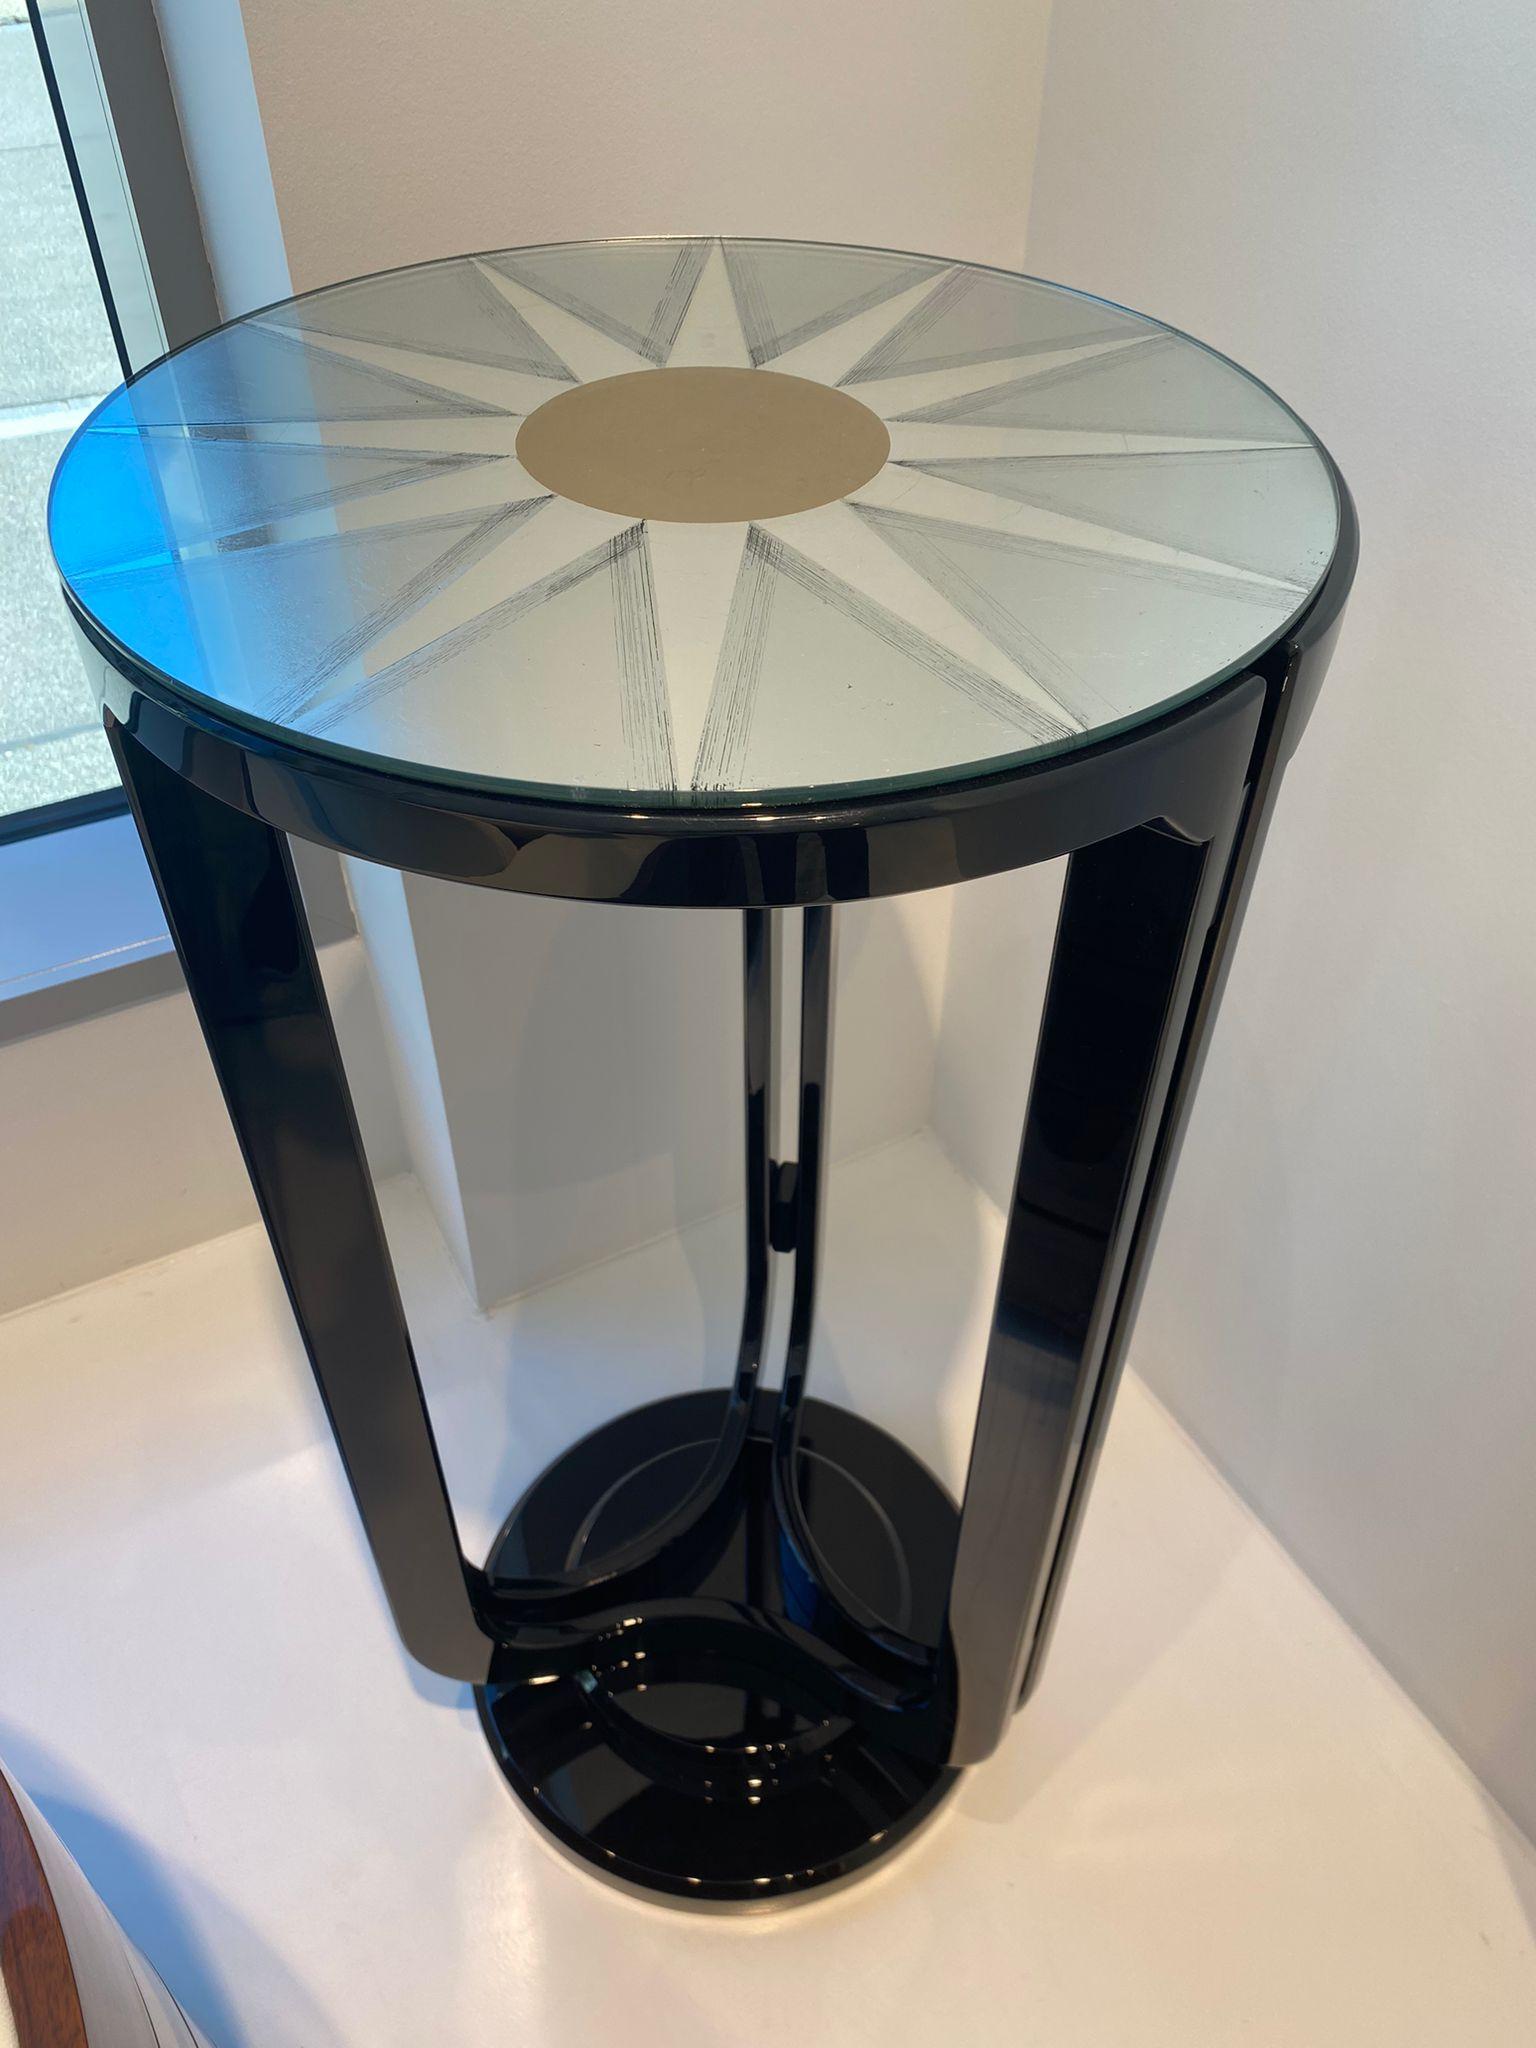 The present is non-existent without a past: This console table projects universal values in a fresh way! A round, star-struck table top seemingly erupts from the carefully designed rounded supportive legs. The High-gloss lacquer creates a shine in